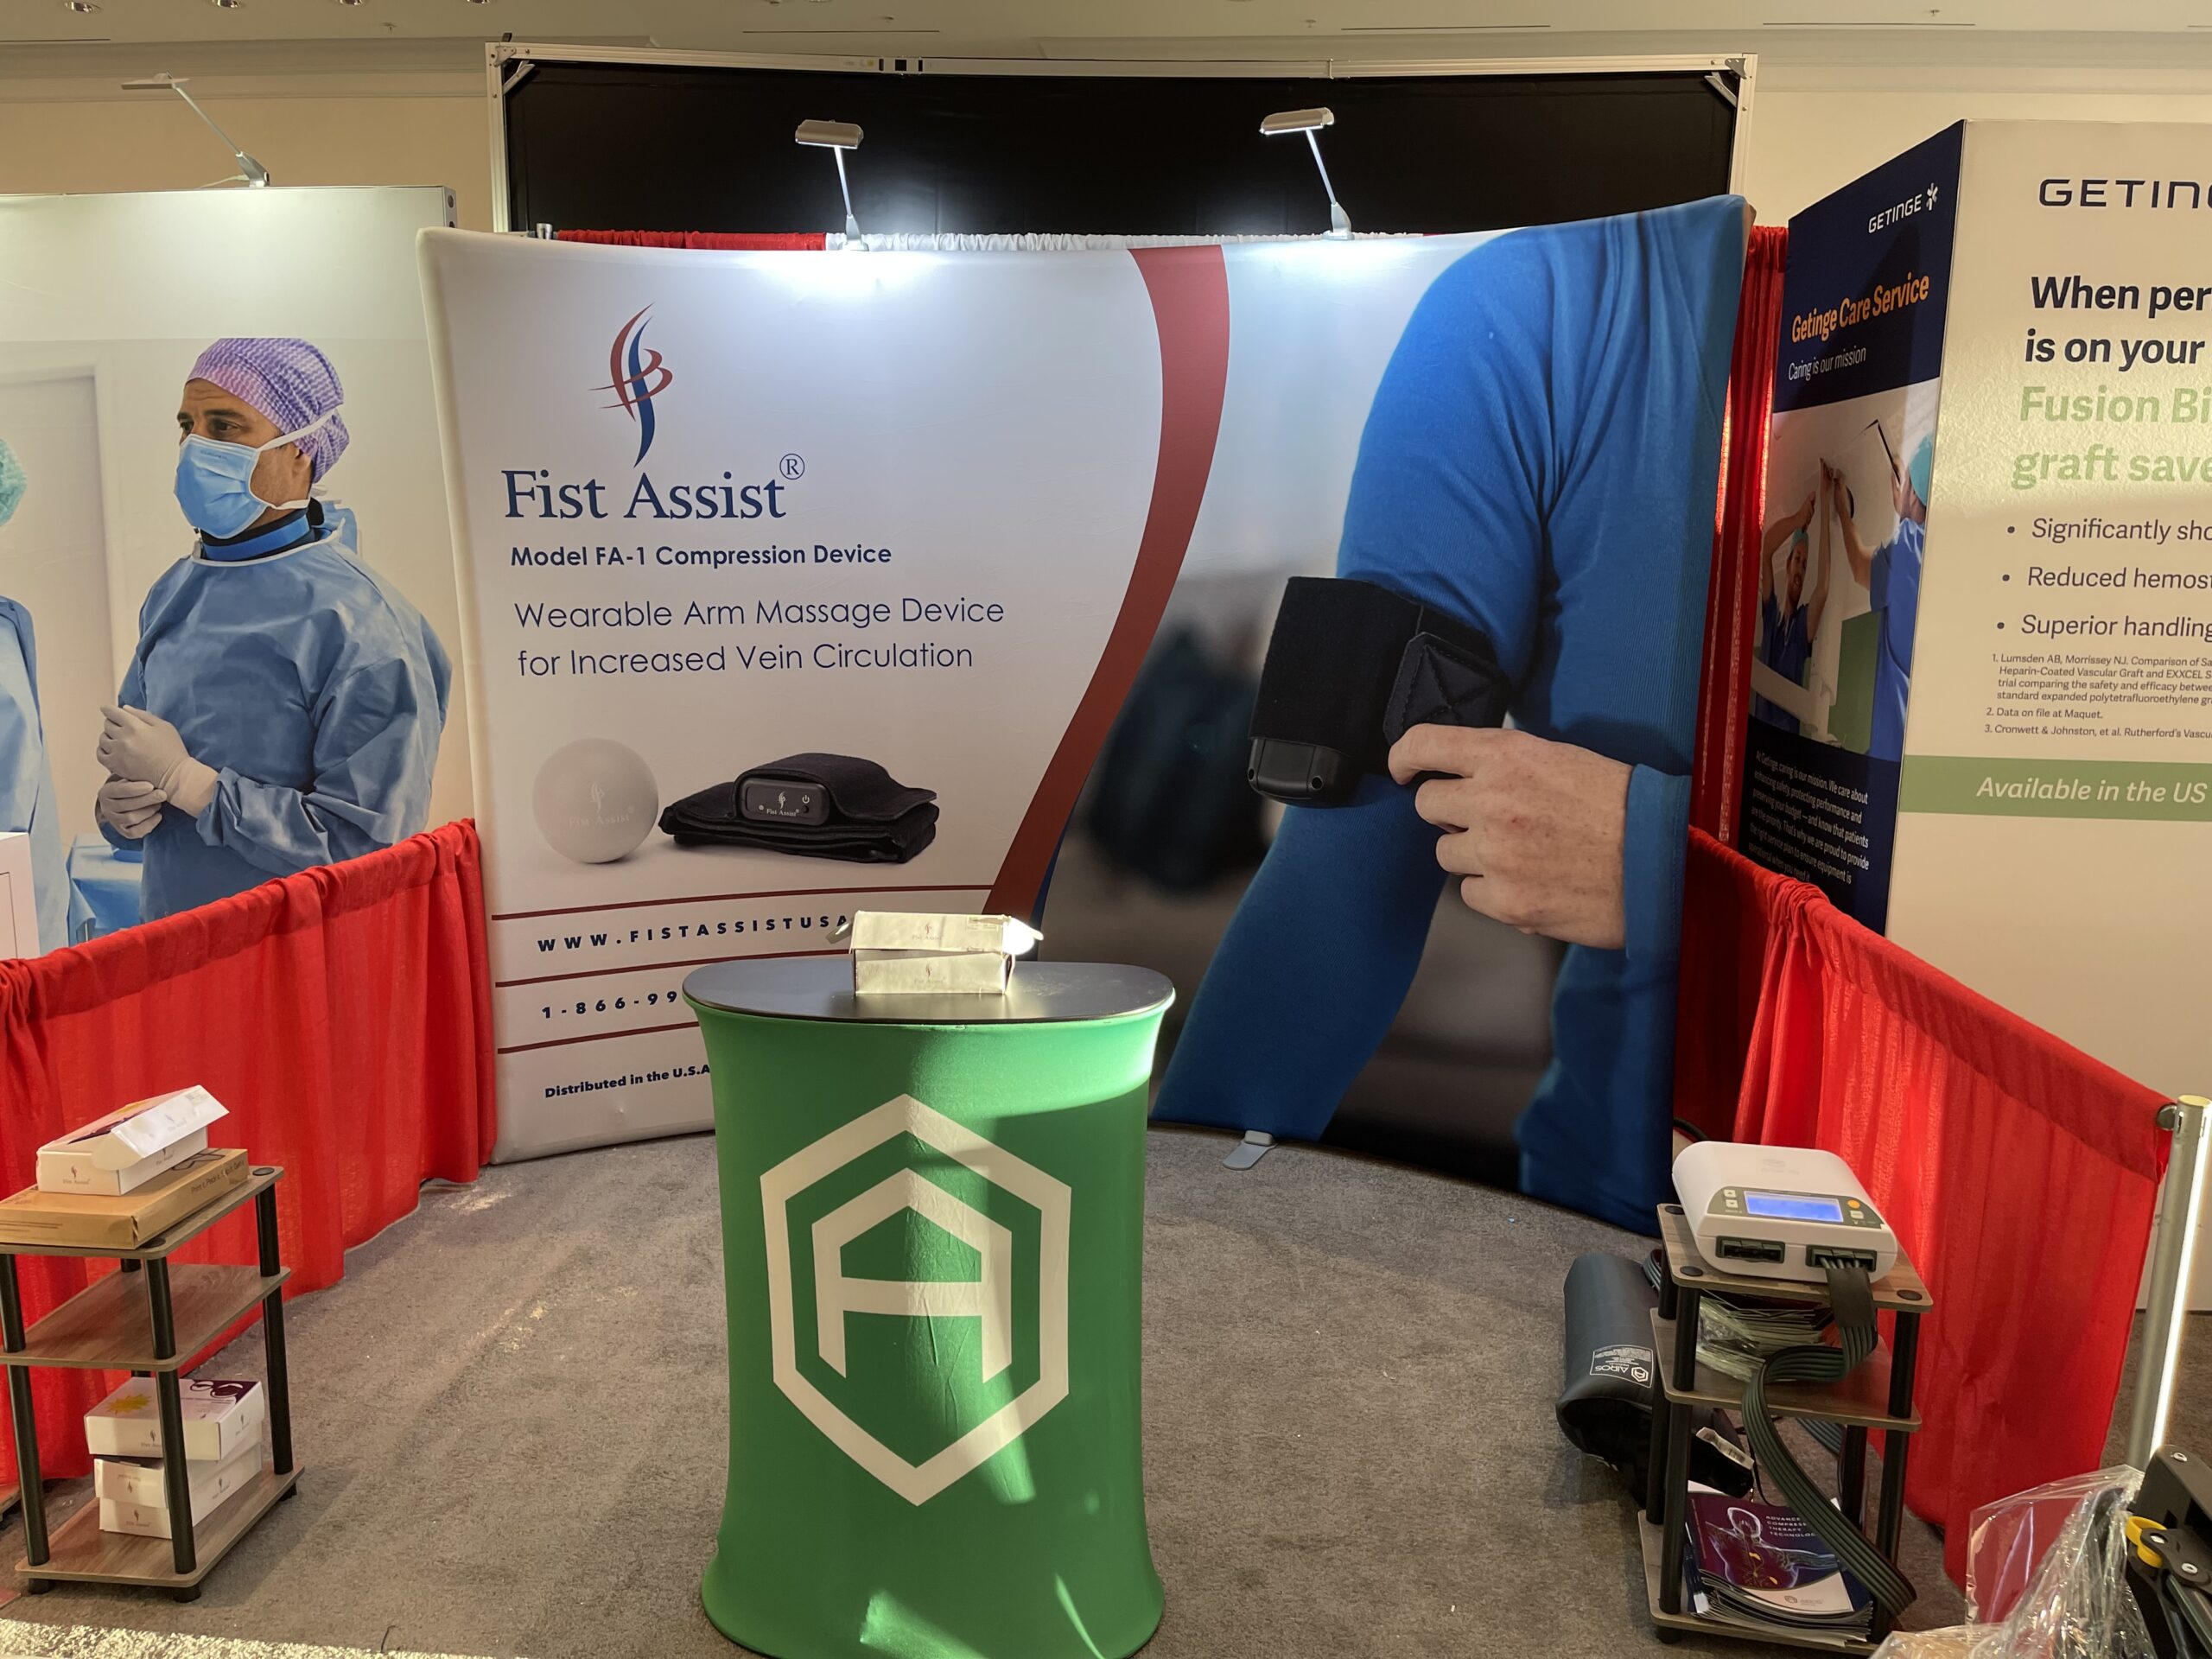 AIROS Medical & Partner Fist Assist Devices, LLC Presenting Compression Products at 2021 VEITHsymposium